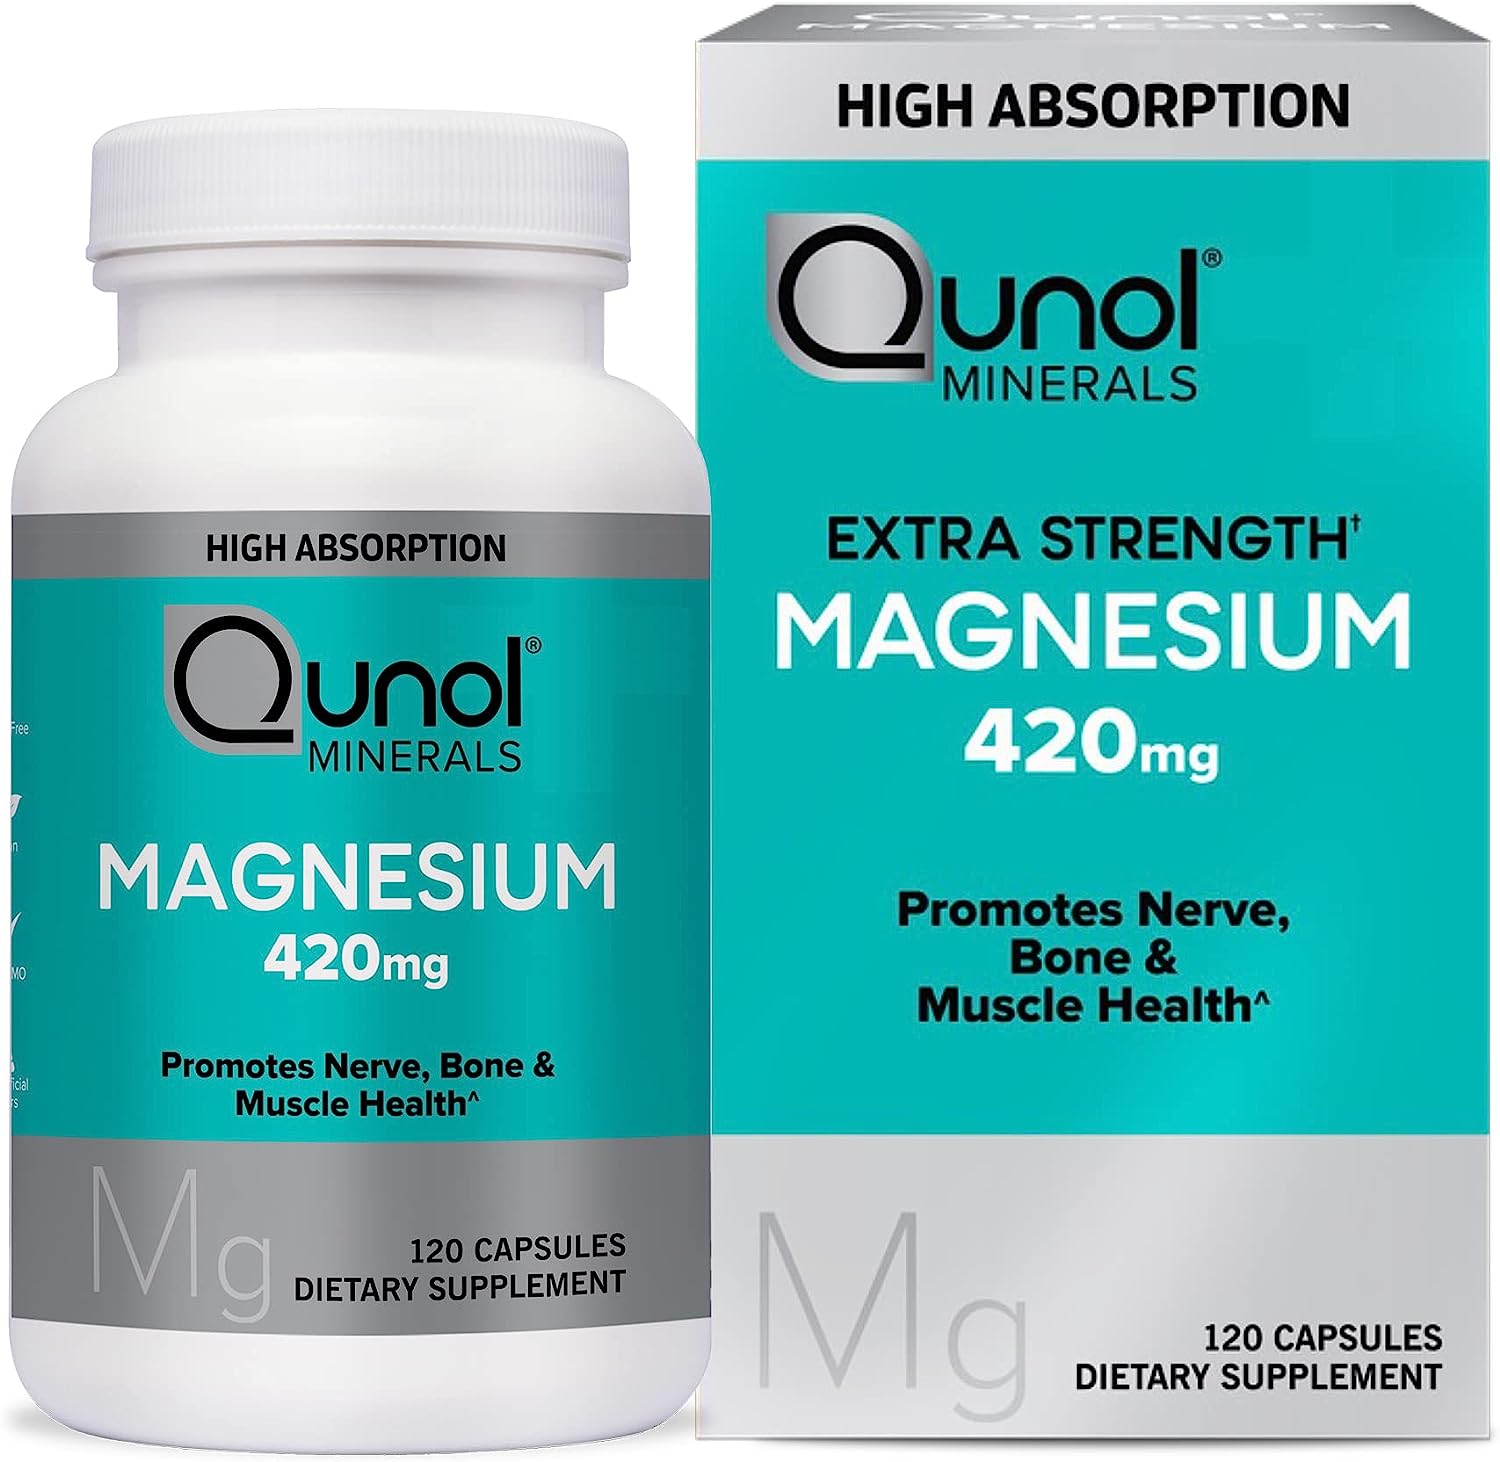 Qunol Magnesium Glycinate Capsules 420mg, High Absorption Magnesium Supplement, Extra Strength, Bone and Muscle Health Supplement, 120 Count